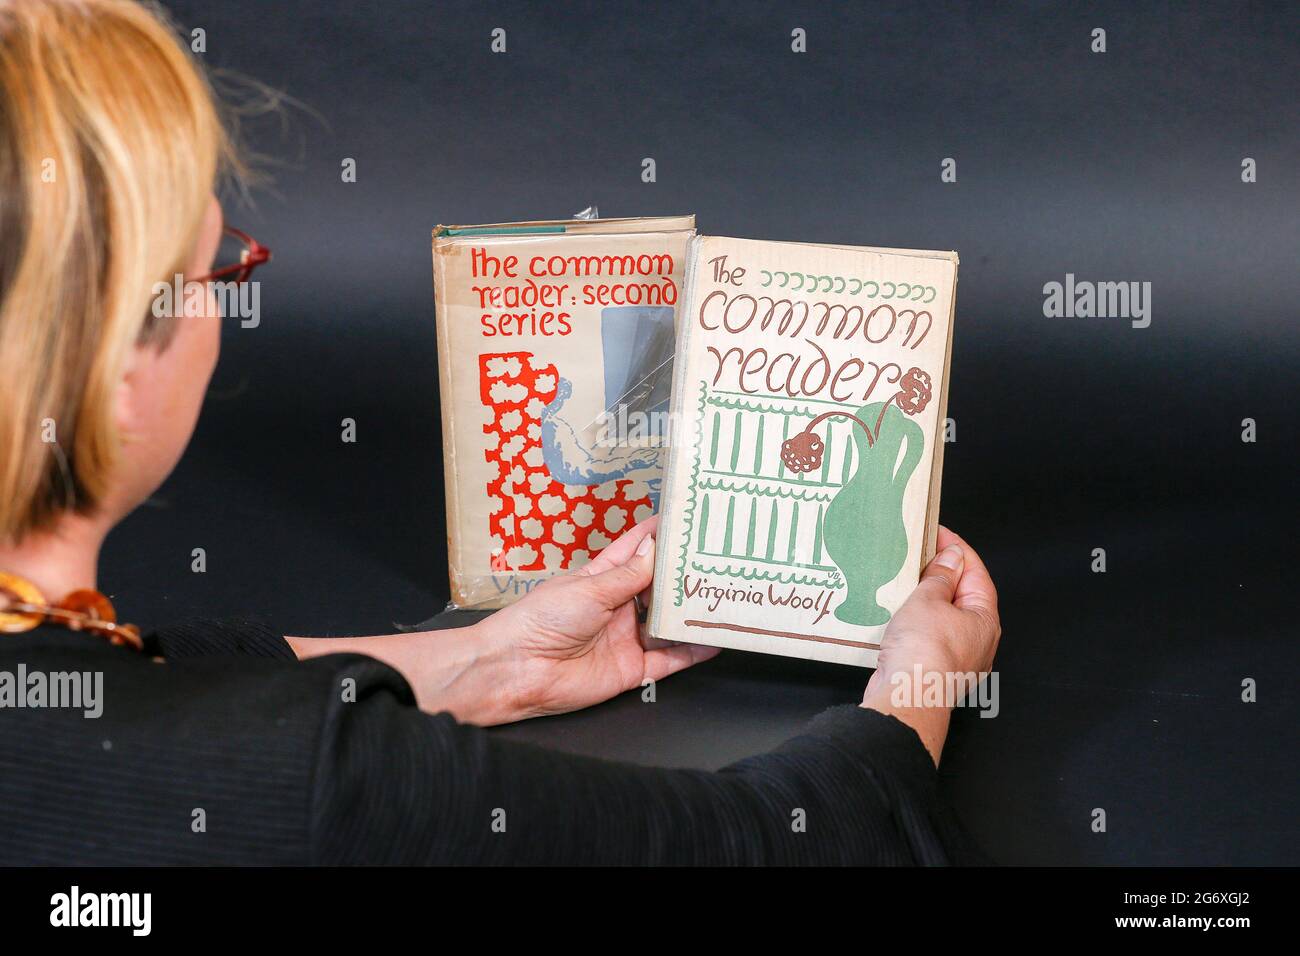 Newpound, Wisborough Green. 09th July 2021. Bellmans' books and manuscripts auction, Wisborough Green, West Sussex. Silke Lohmann posing with the modern edition of Virginia Woolf's the Common Reader at Bellmans Auction House in Wisborough Green. Credit: james jagger/Alamy Live News Stock Photo